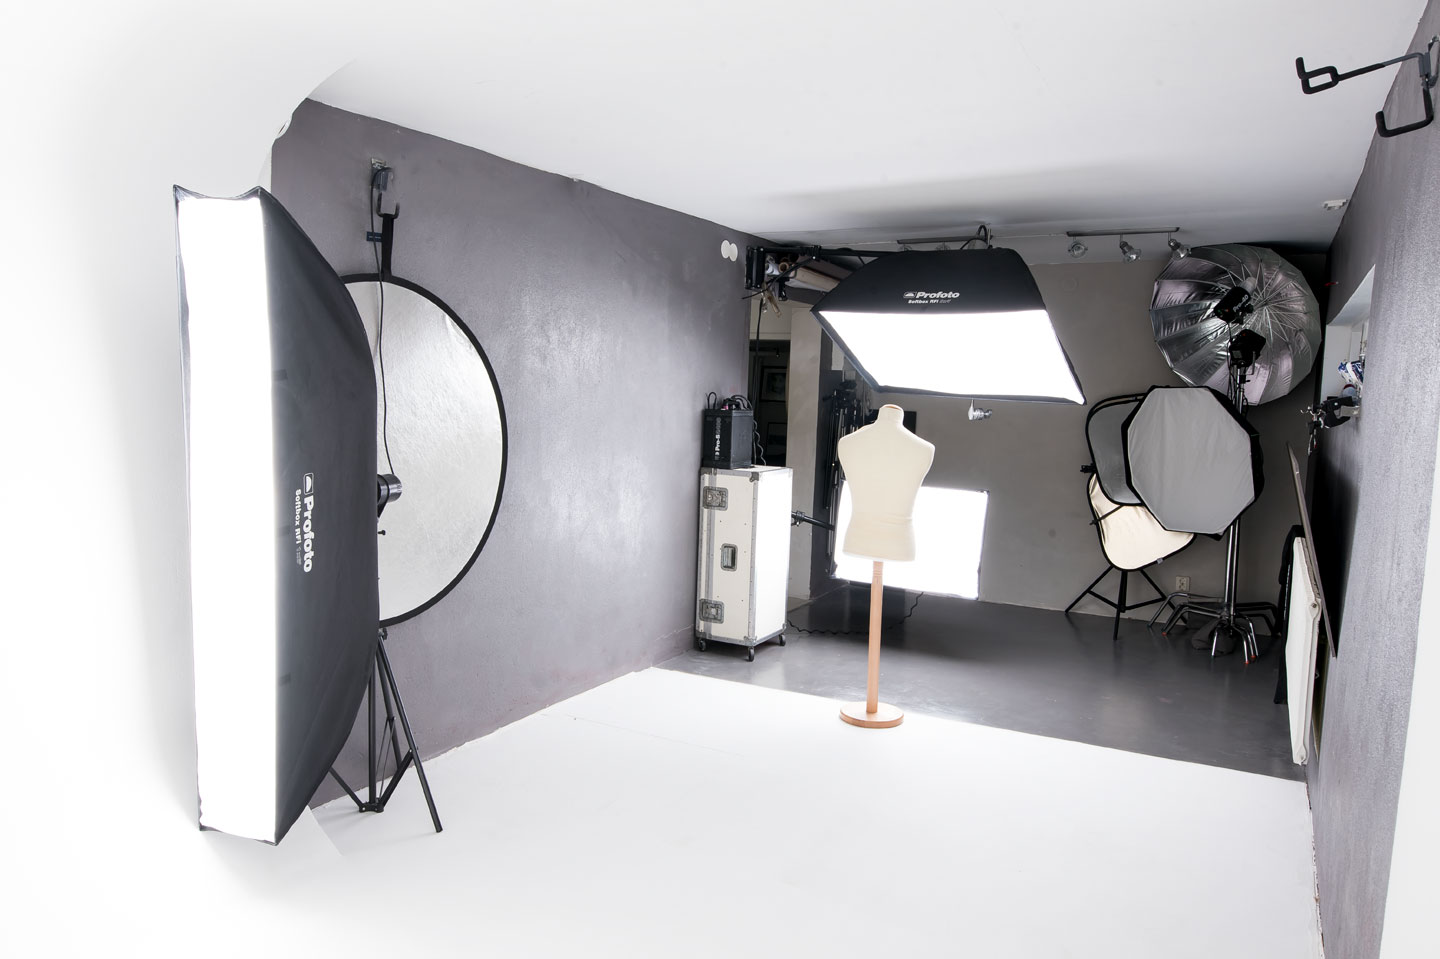 Professional photo studio with lights, umbrellas, and softboxes